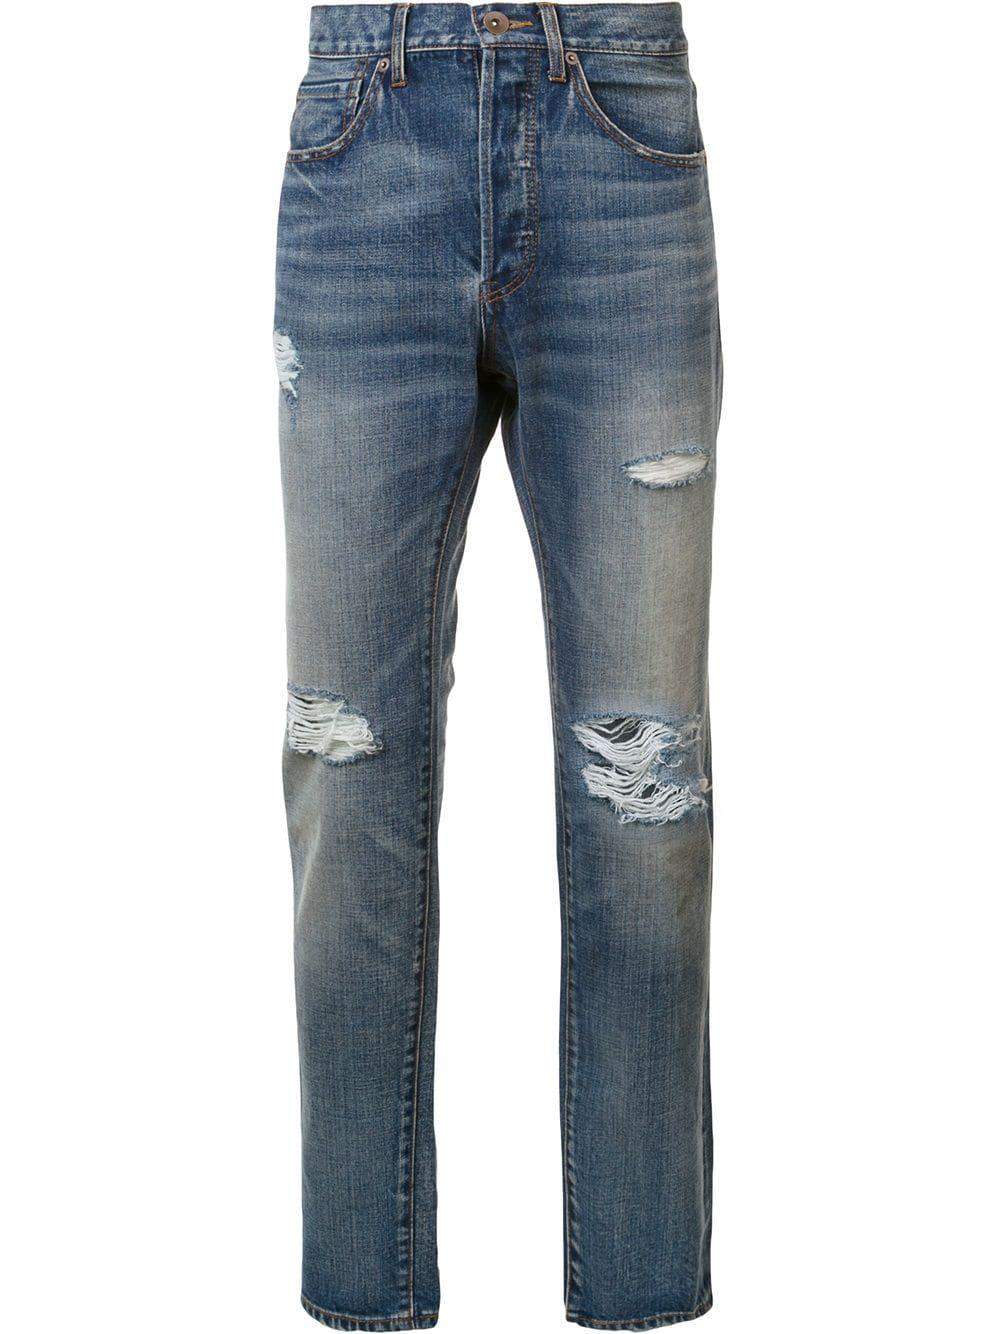 distressed mid-rise jeans by 321